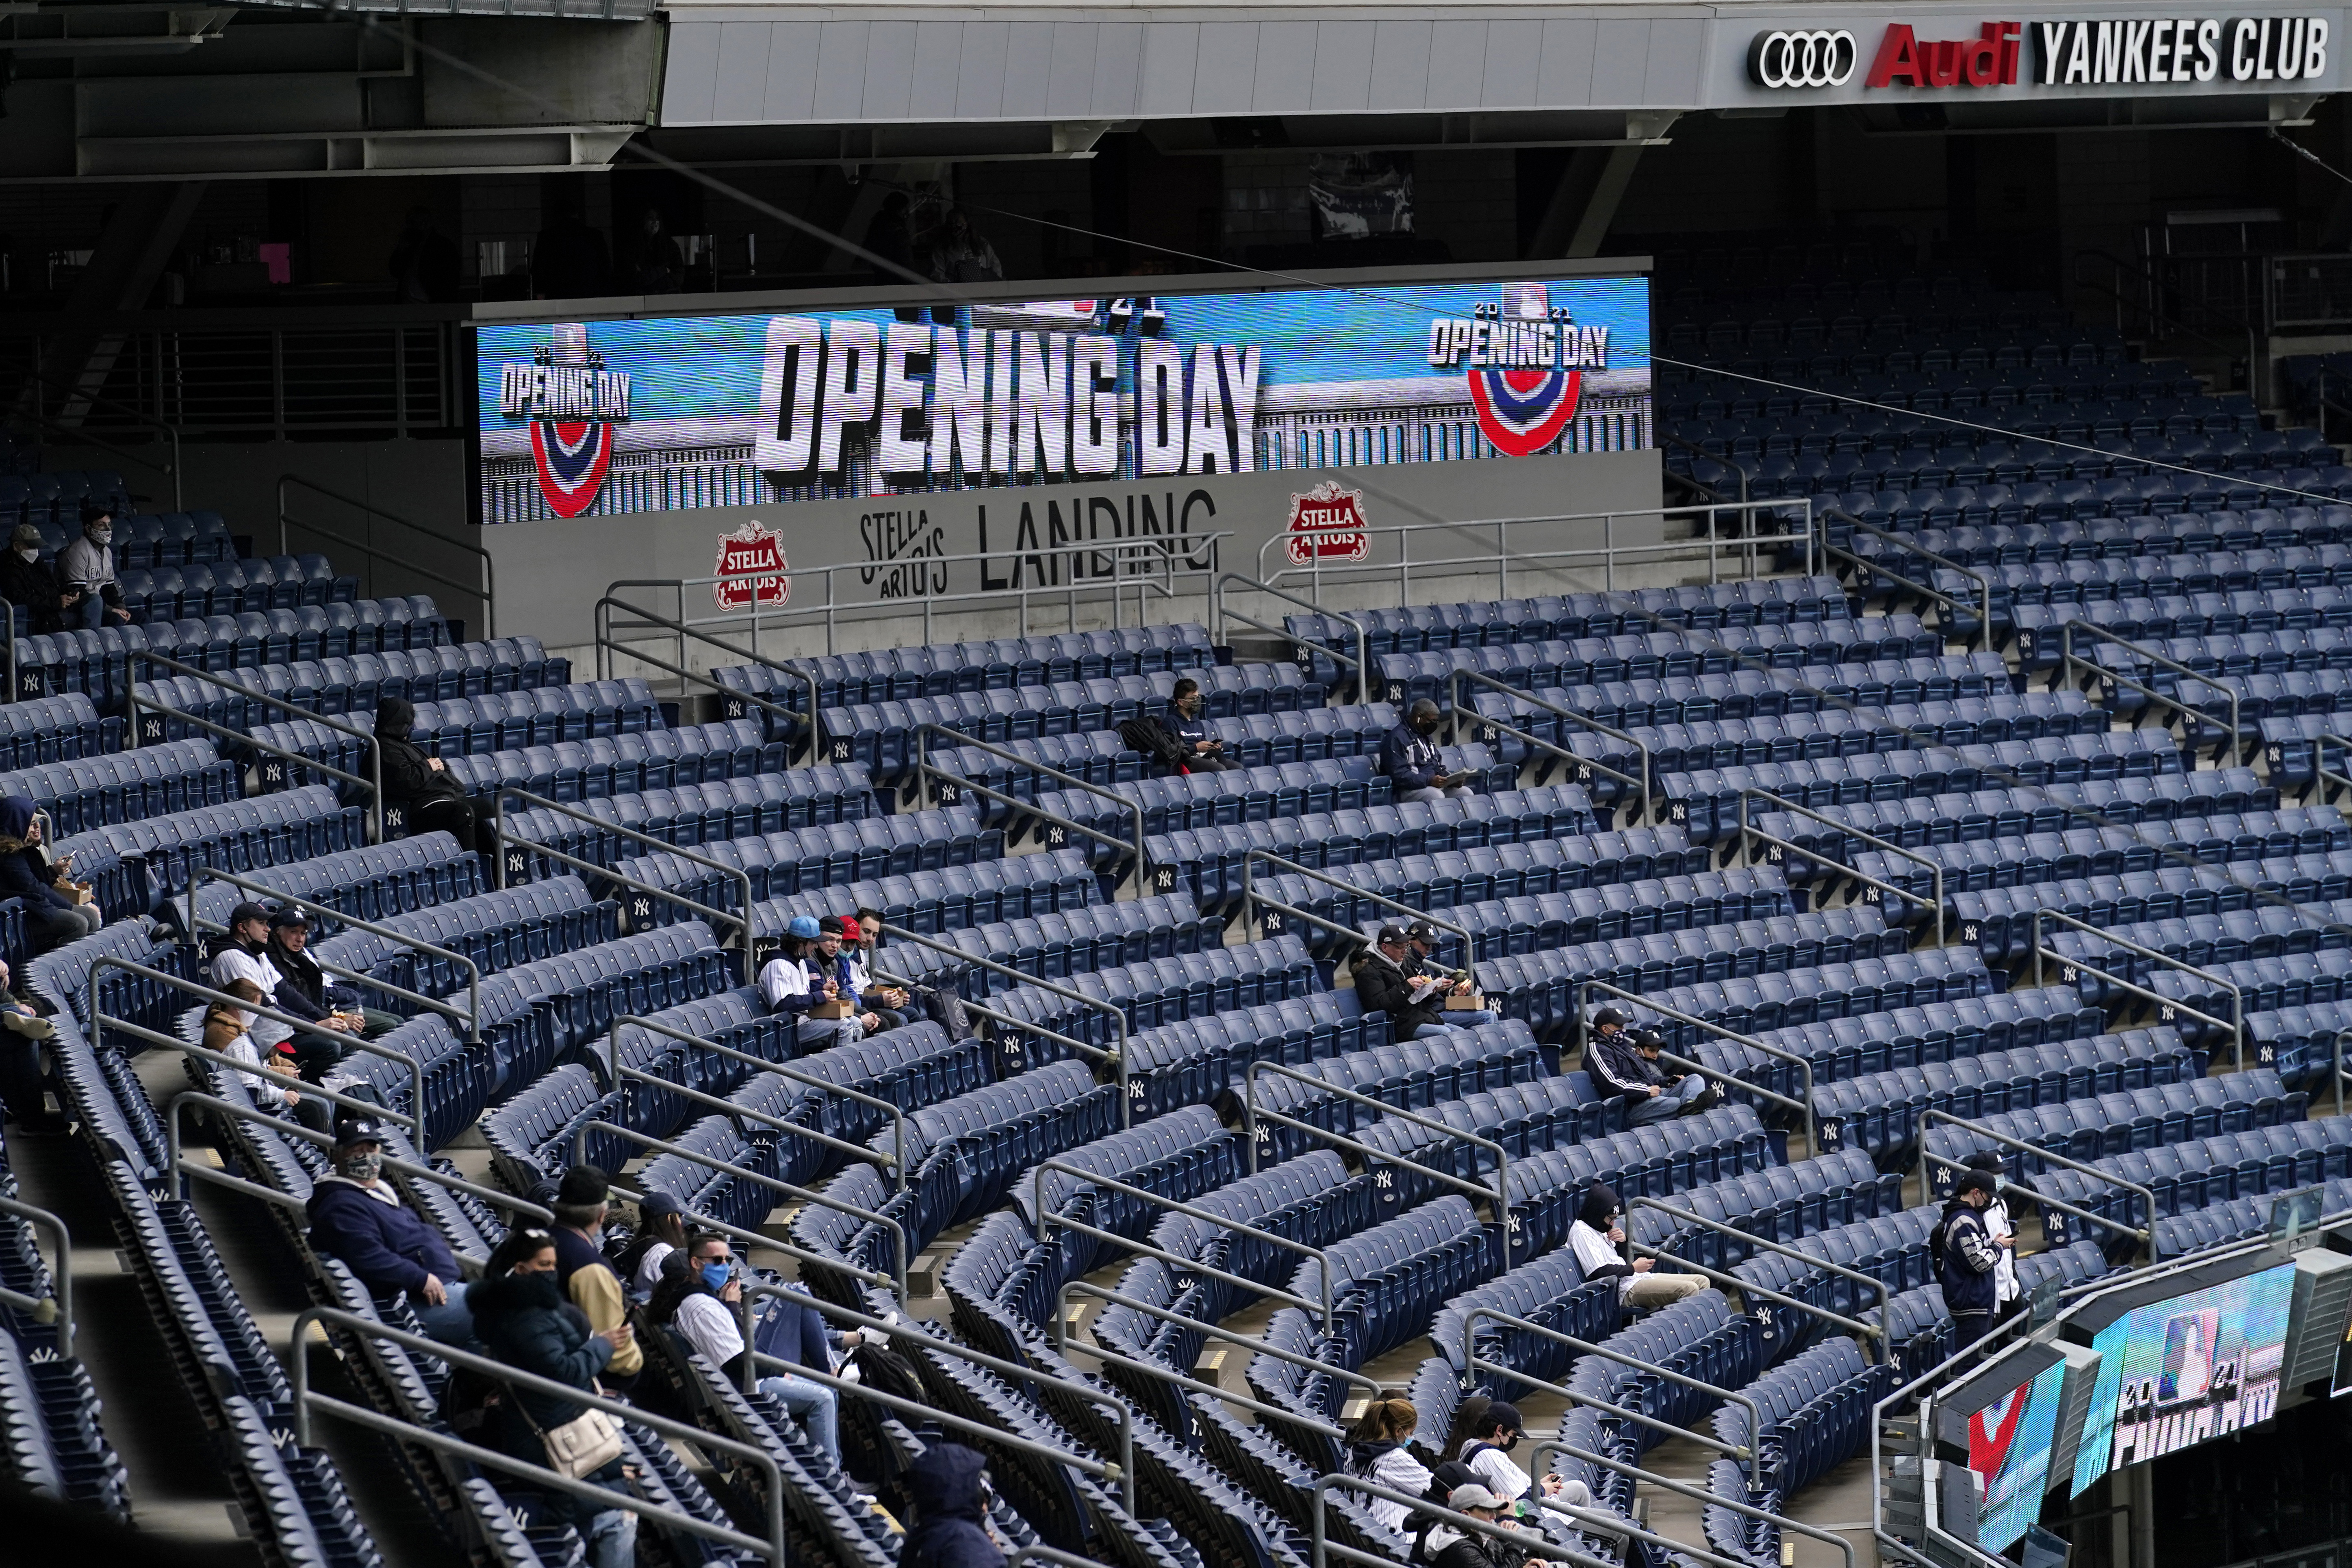 Mlb Opening Day Schedule 2022 Mlb Will Give 30-Team Opening Day Another Shot In 2022 - The Boston Globe